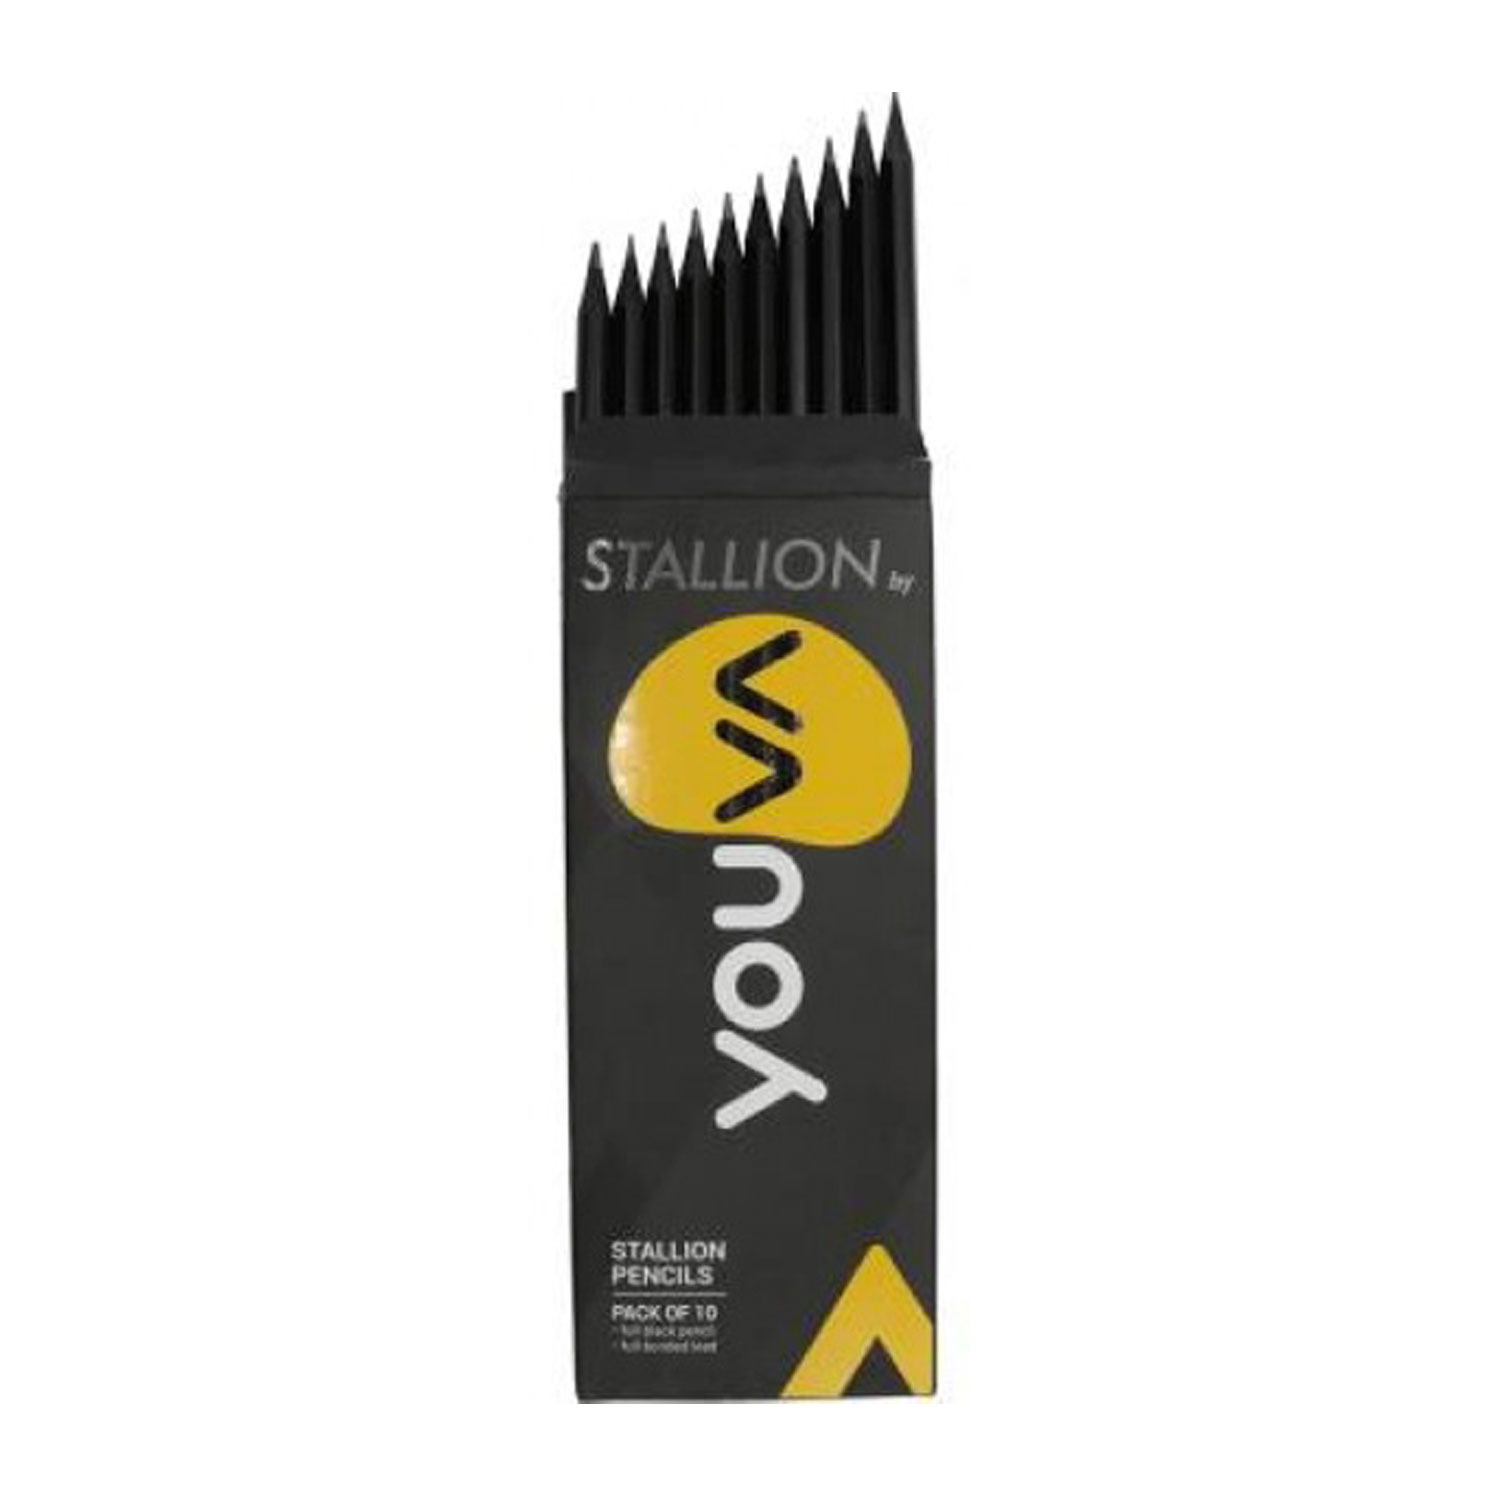 Stallion Black Pencils 10 Piece in One Packet | Youva |VT35006 | Pack of 12